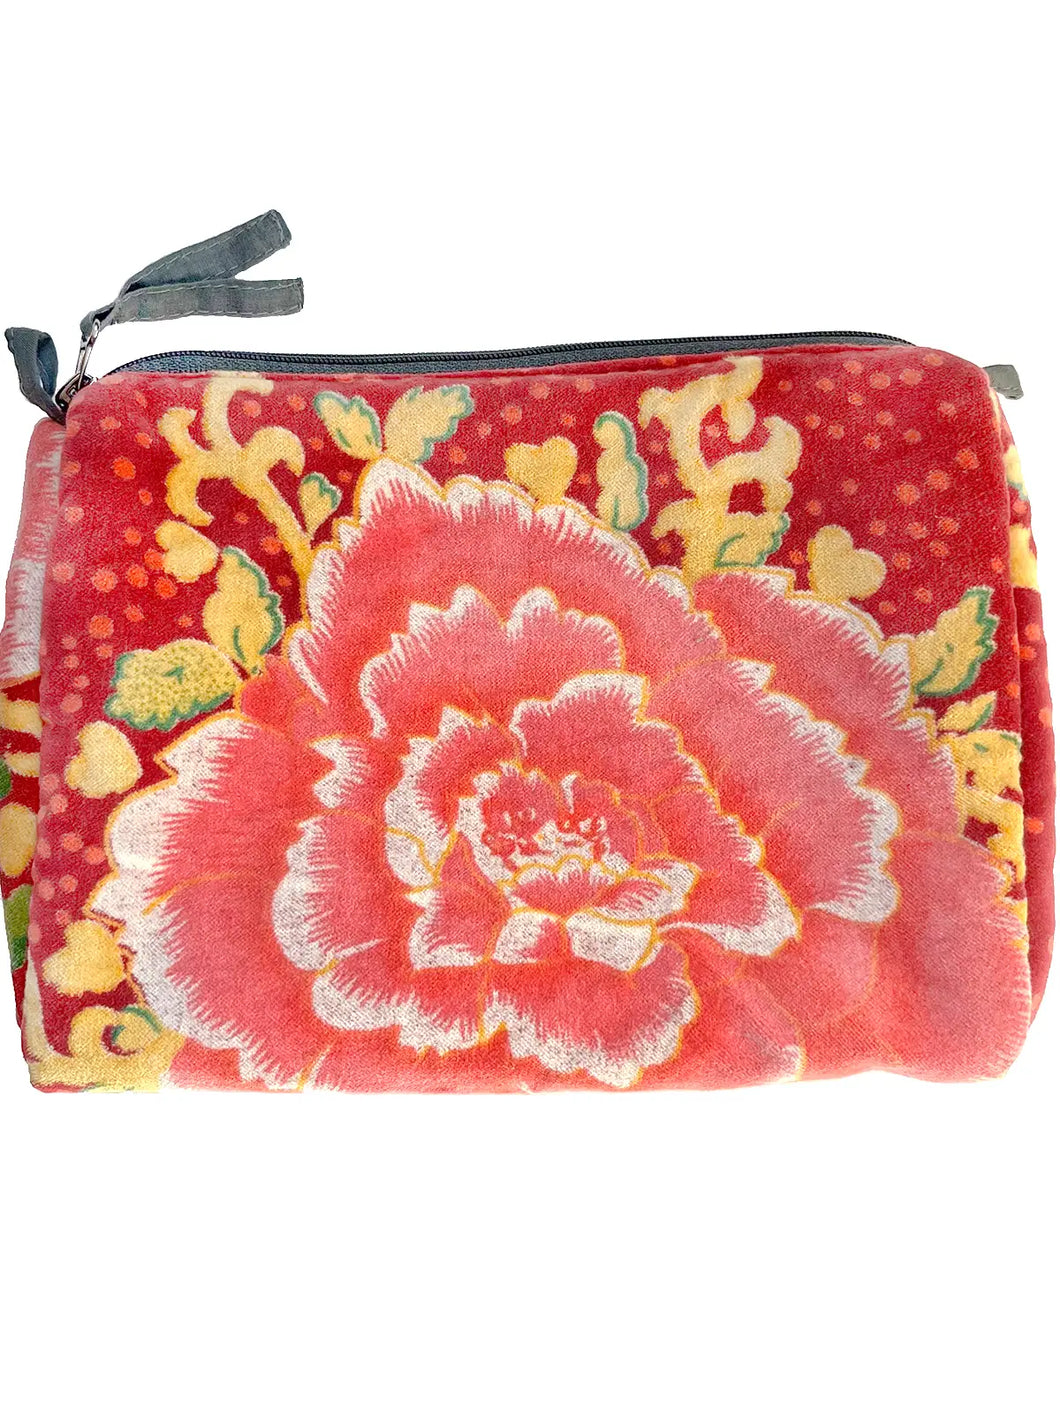 Peonies Velvet Pouch in Red